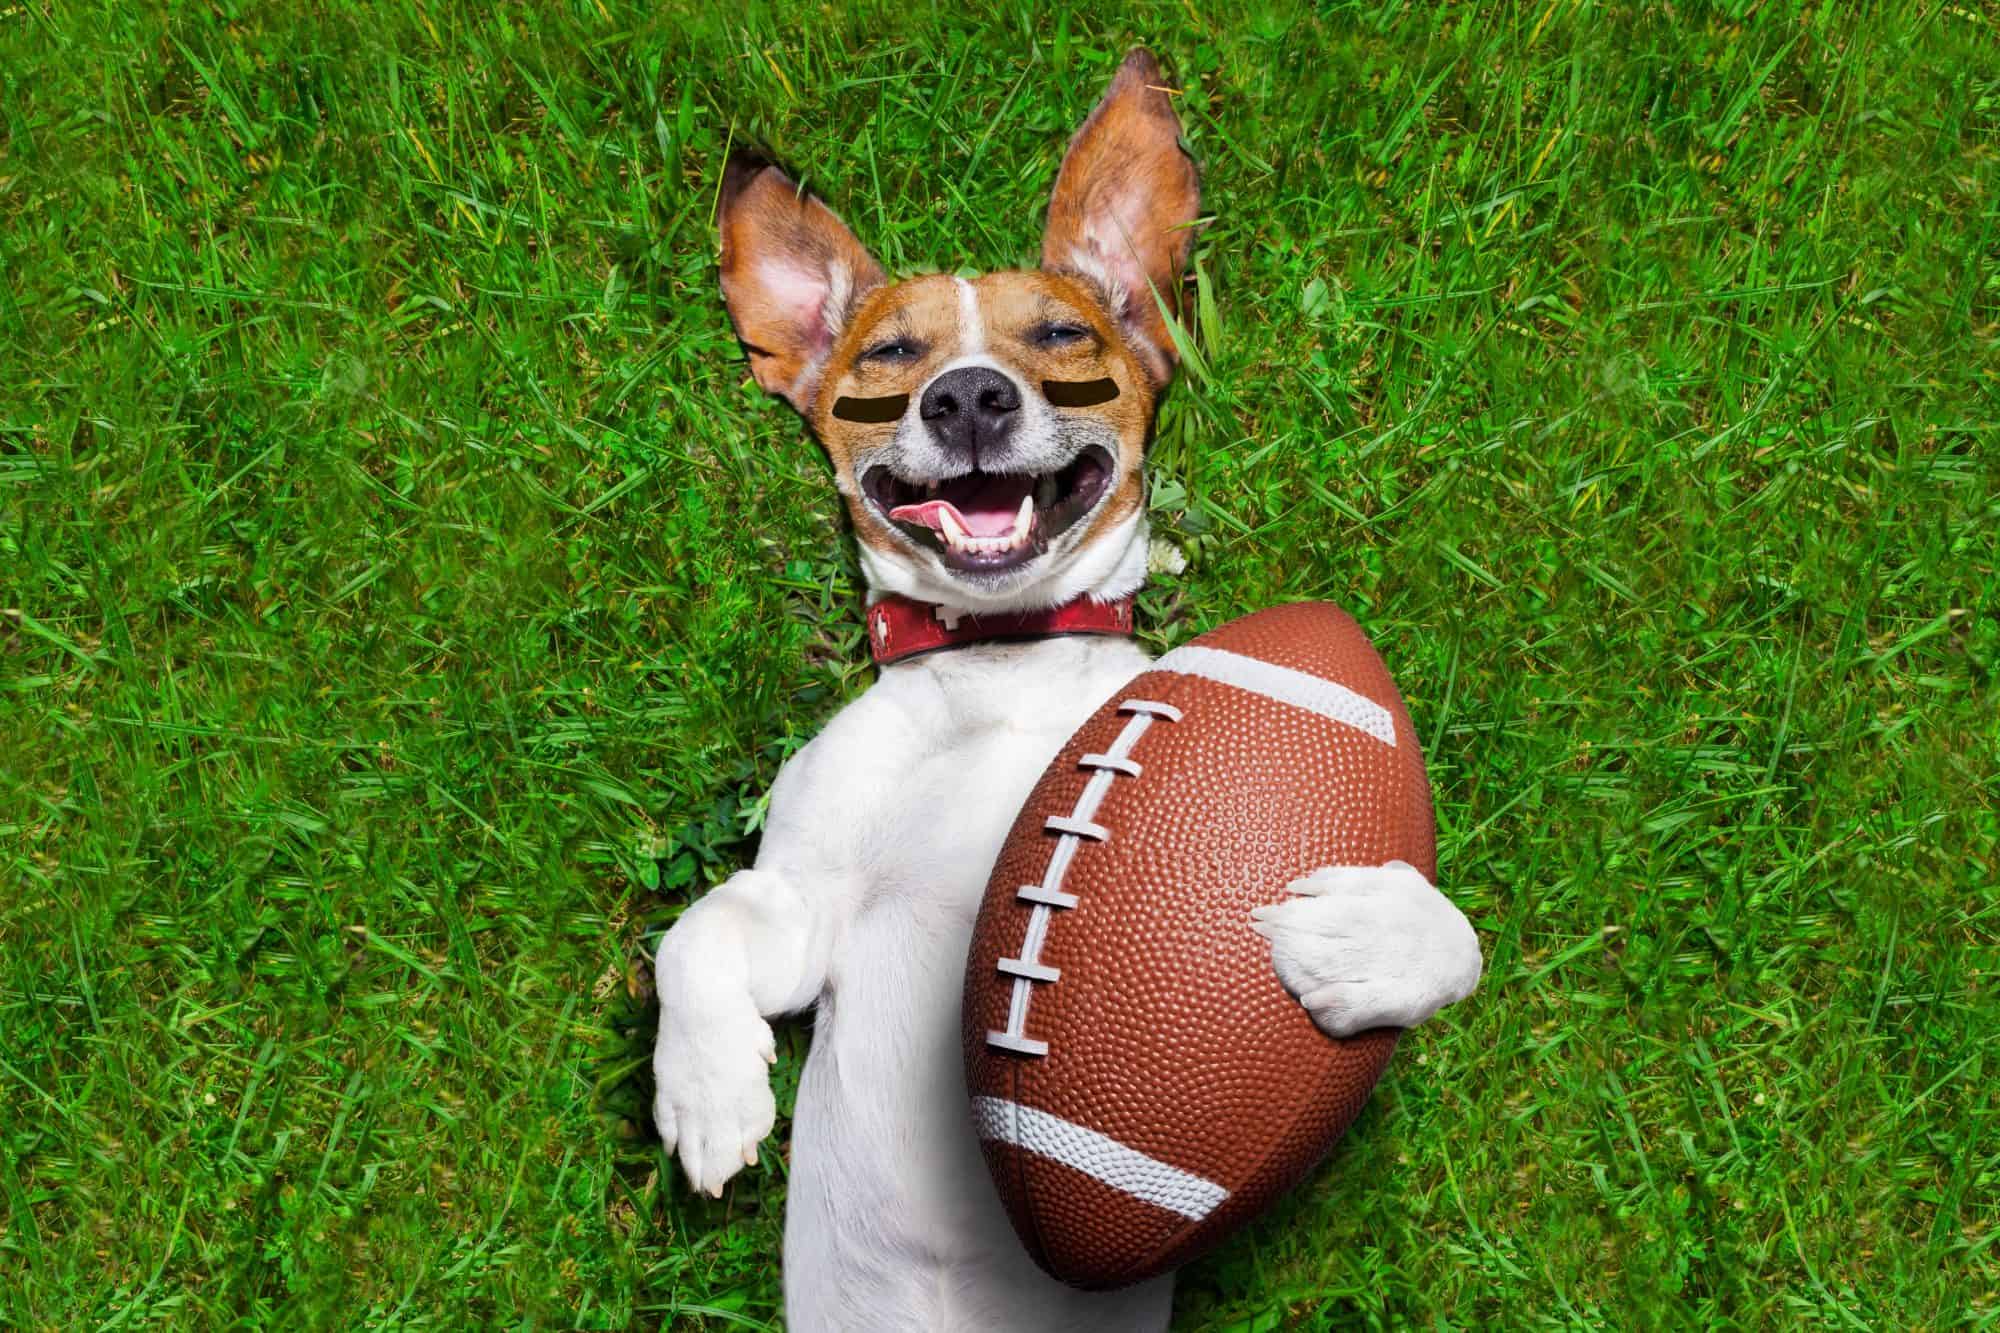 Super Bowl Fun with Your Pup